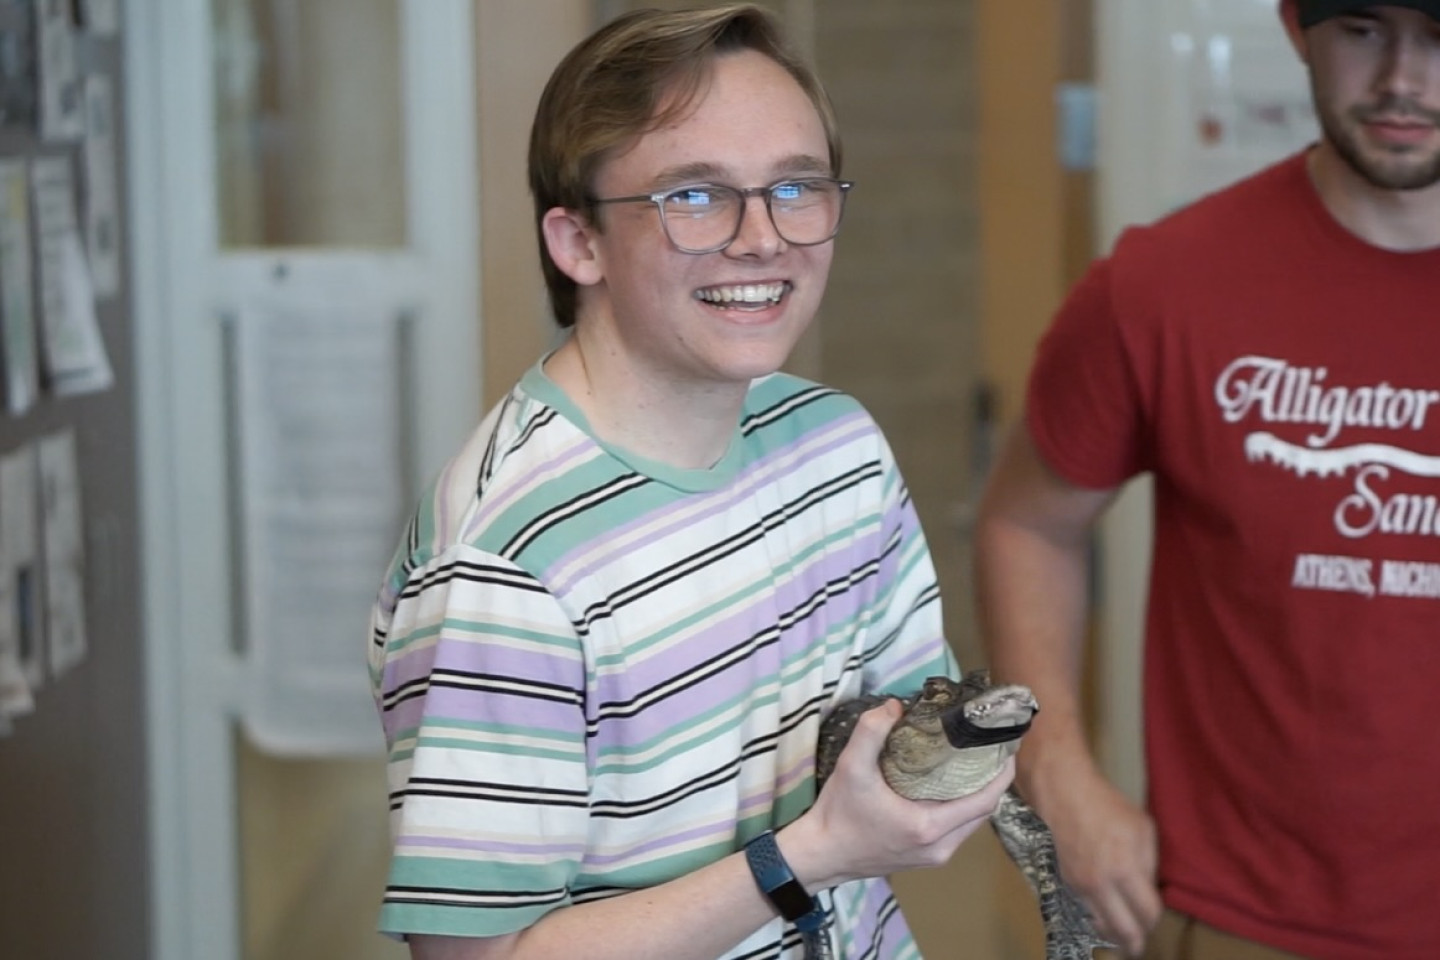 Male student with gator